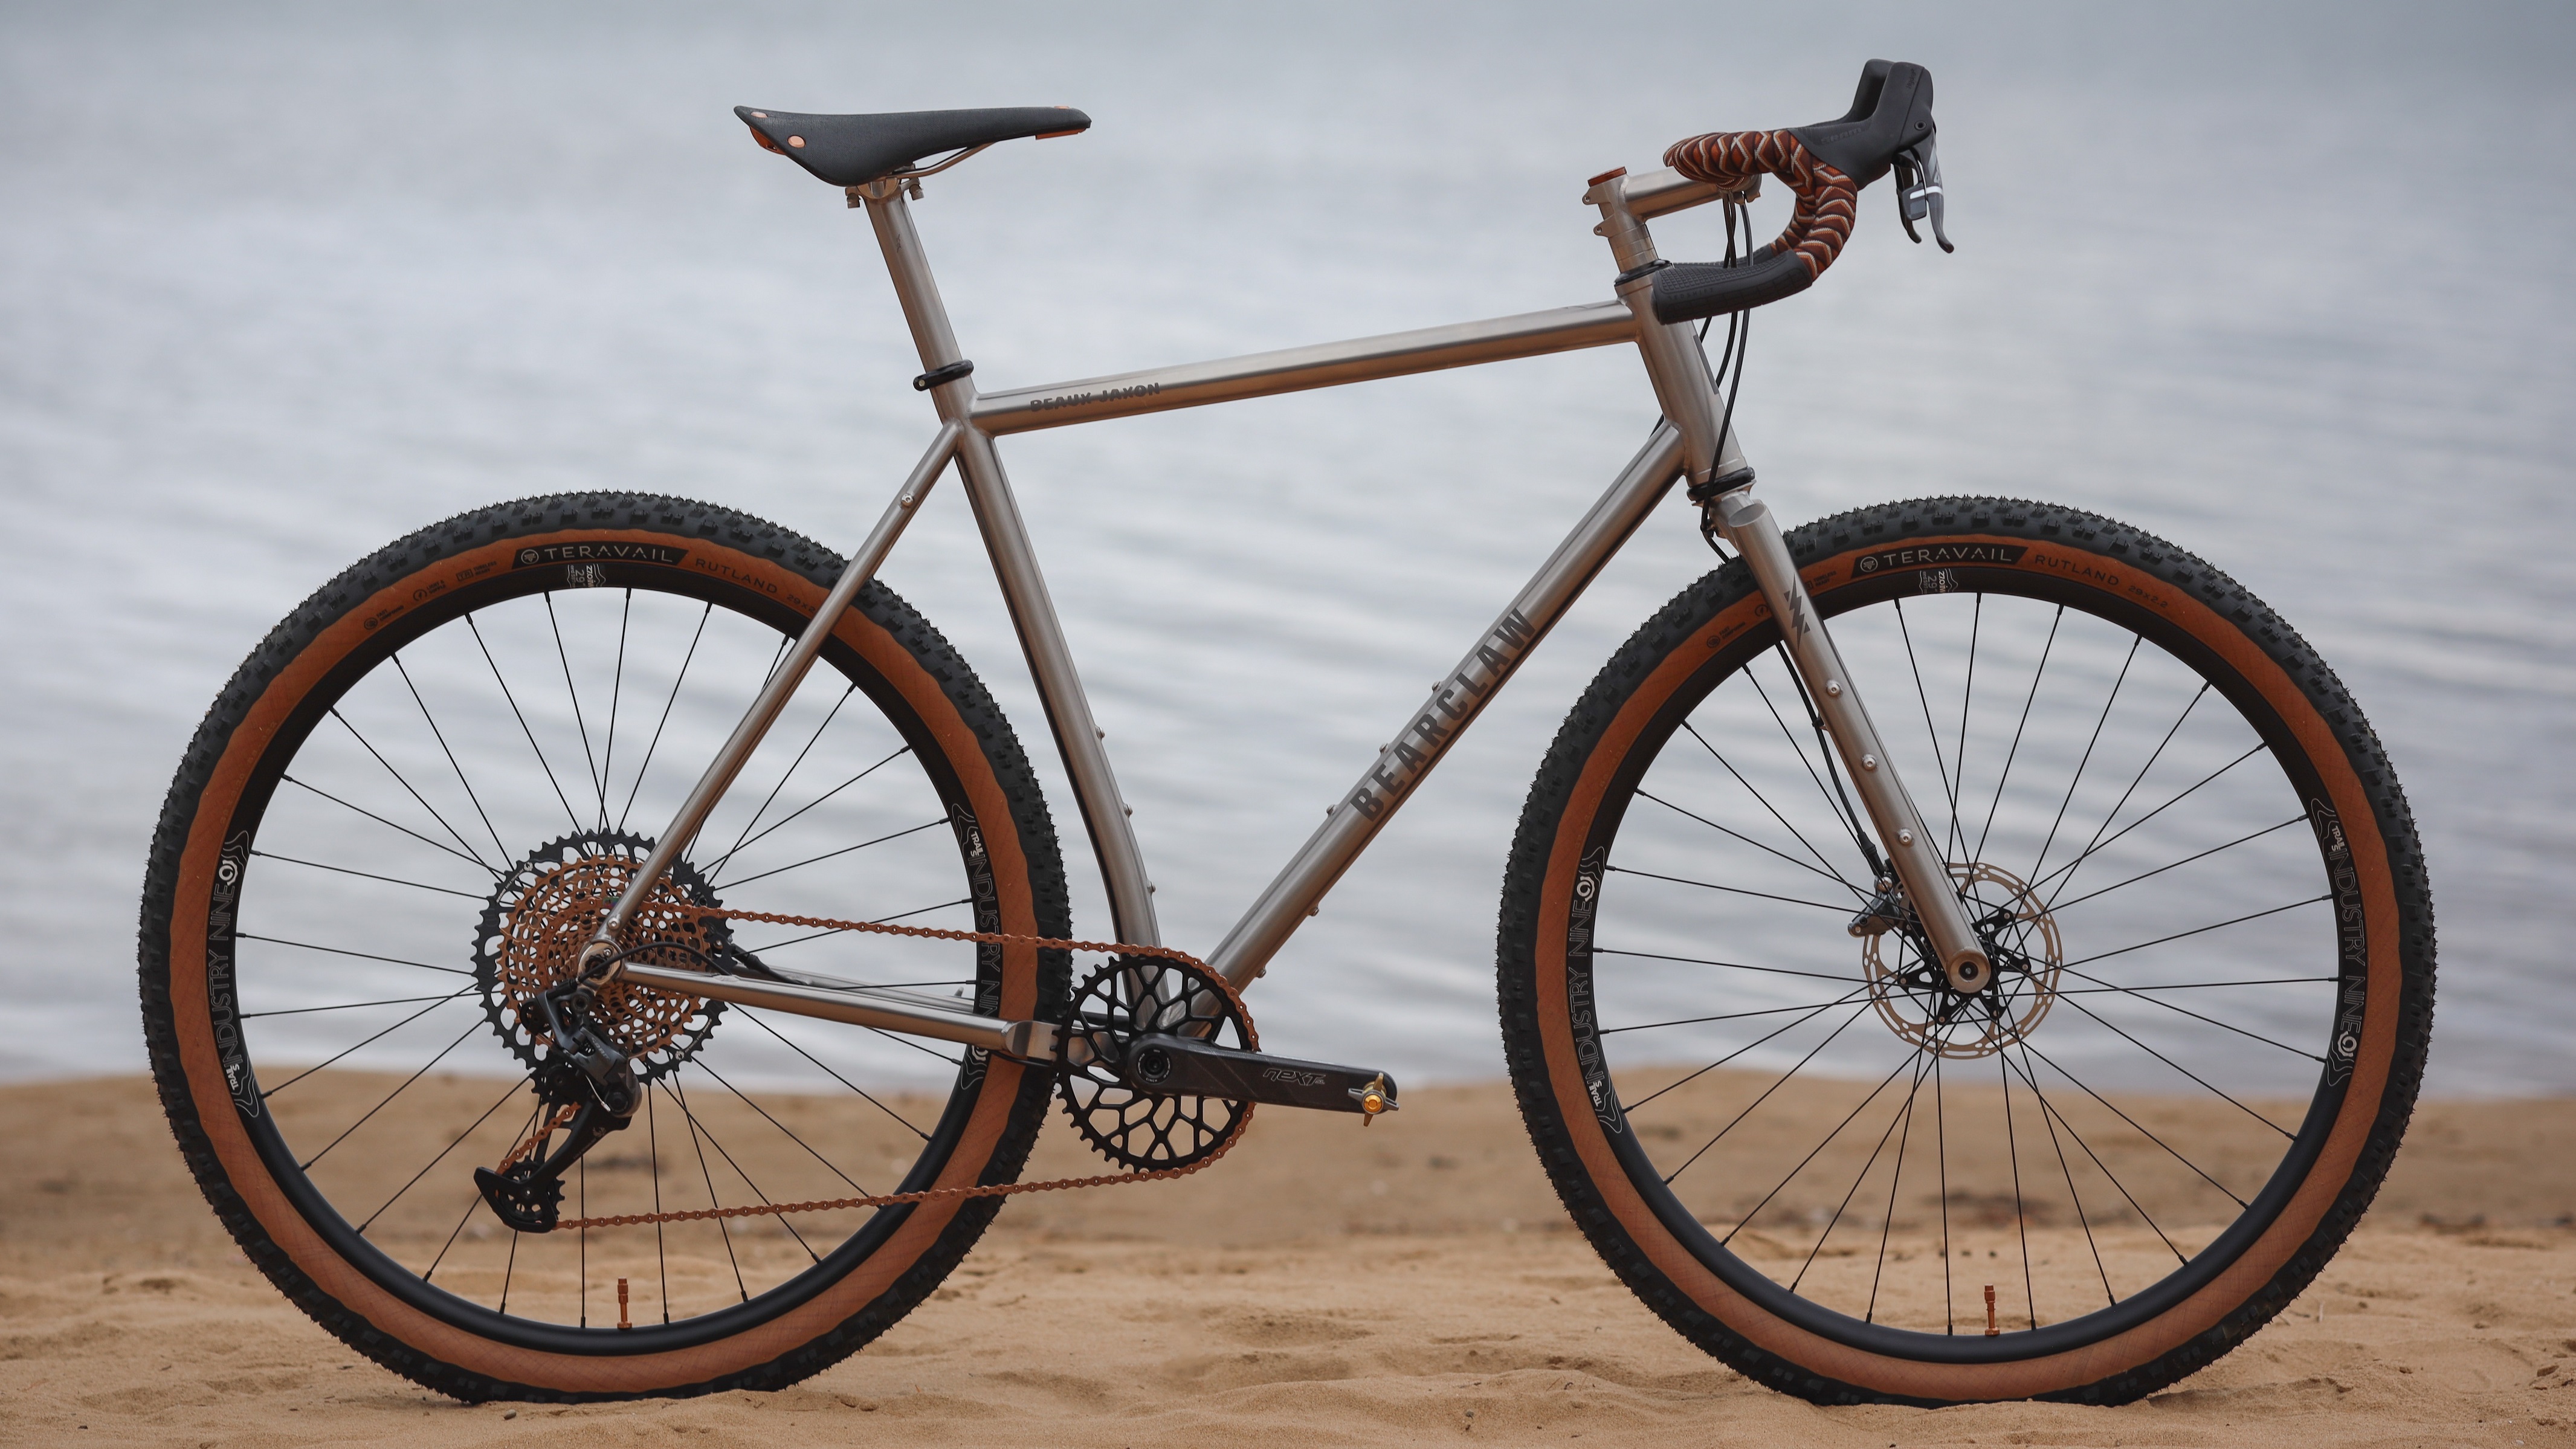 Beach Beaux, our Gravel Plus Bike with Redshift Handlebars and Snake Tape